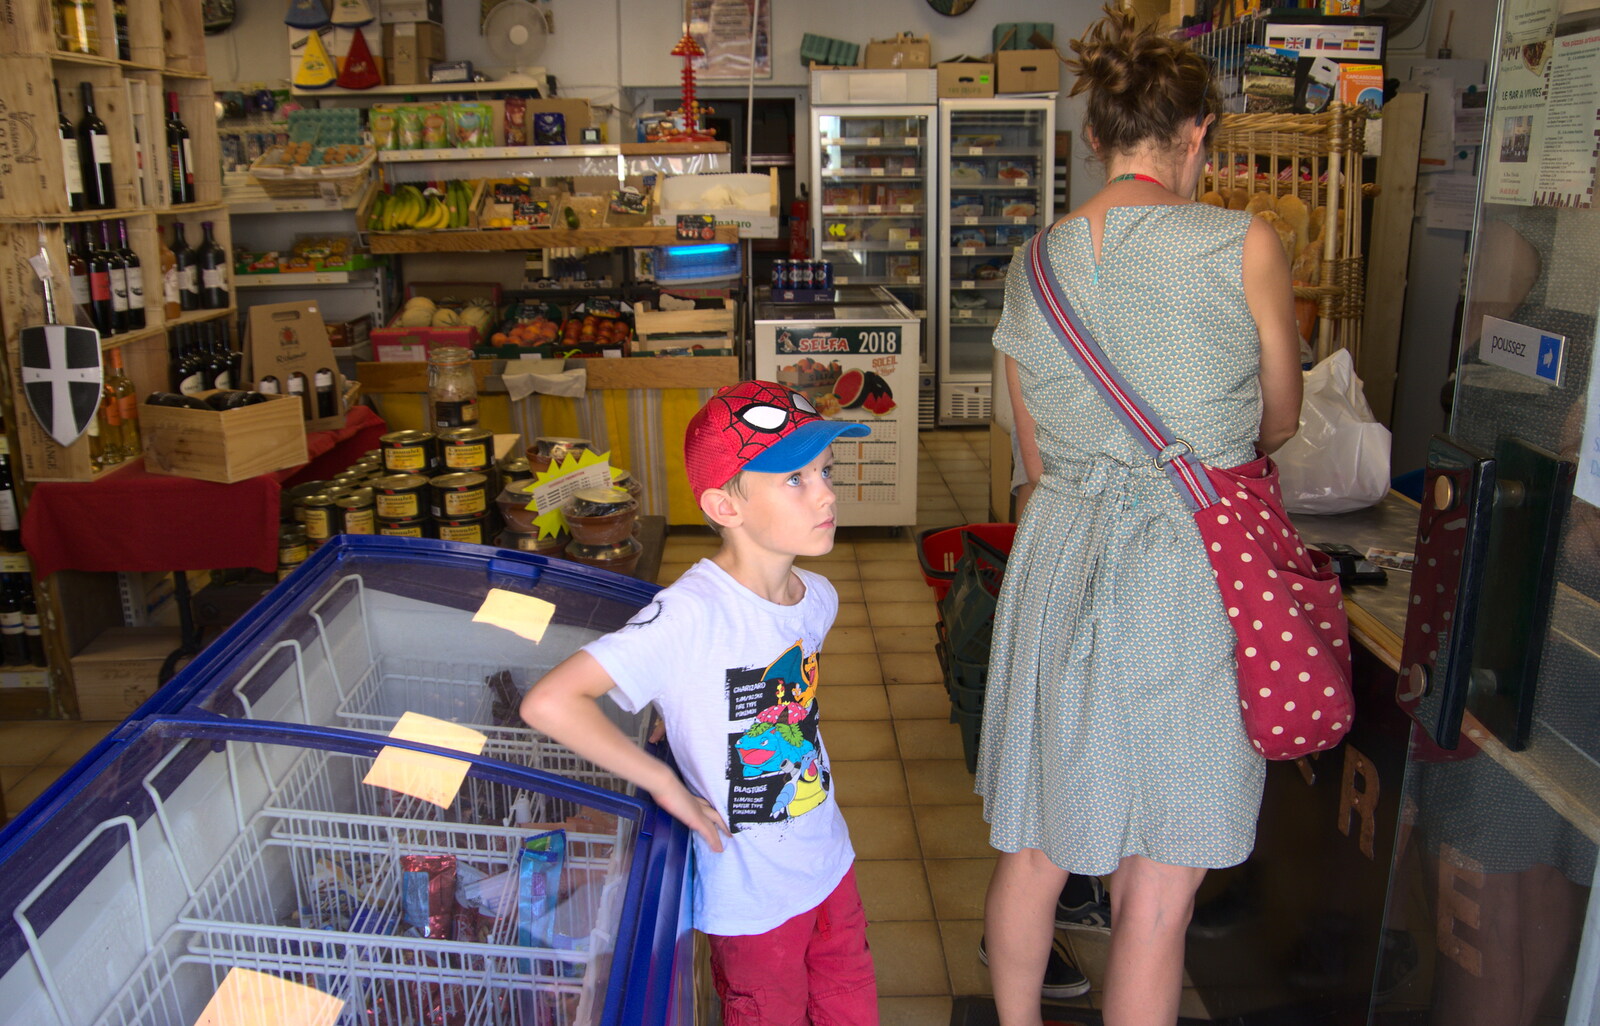 Harry looks around whilst Isobel buys bread from A Trip to Carcassonne, Aude, France - 8th August 2018